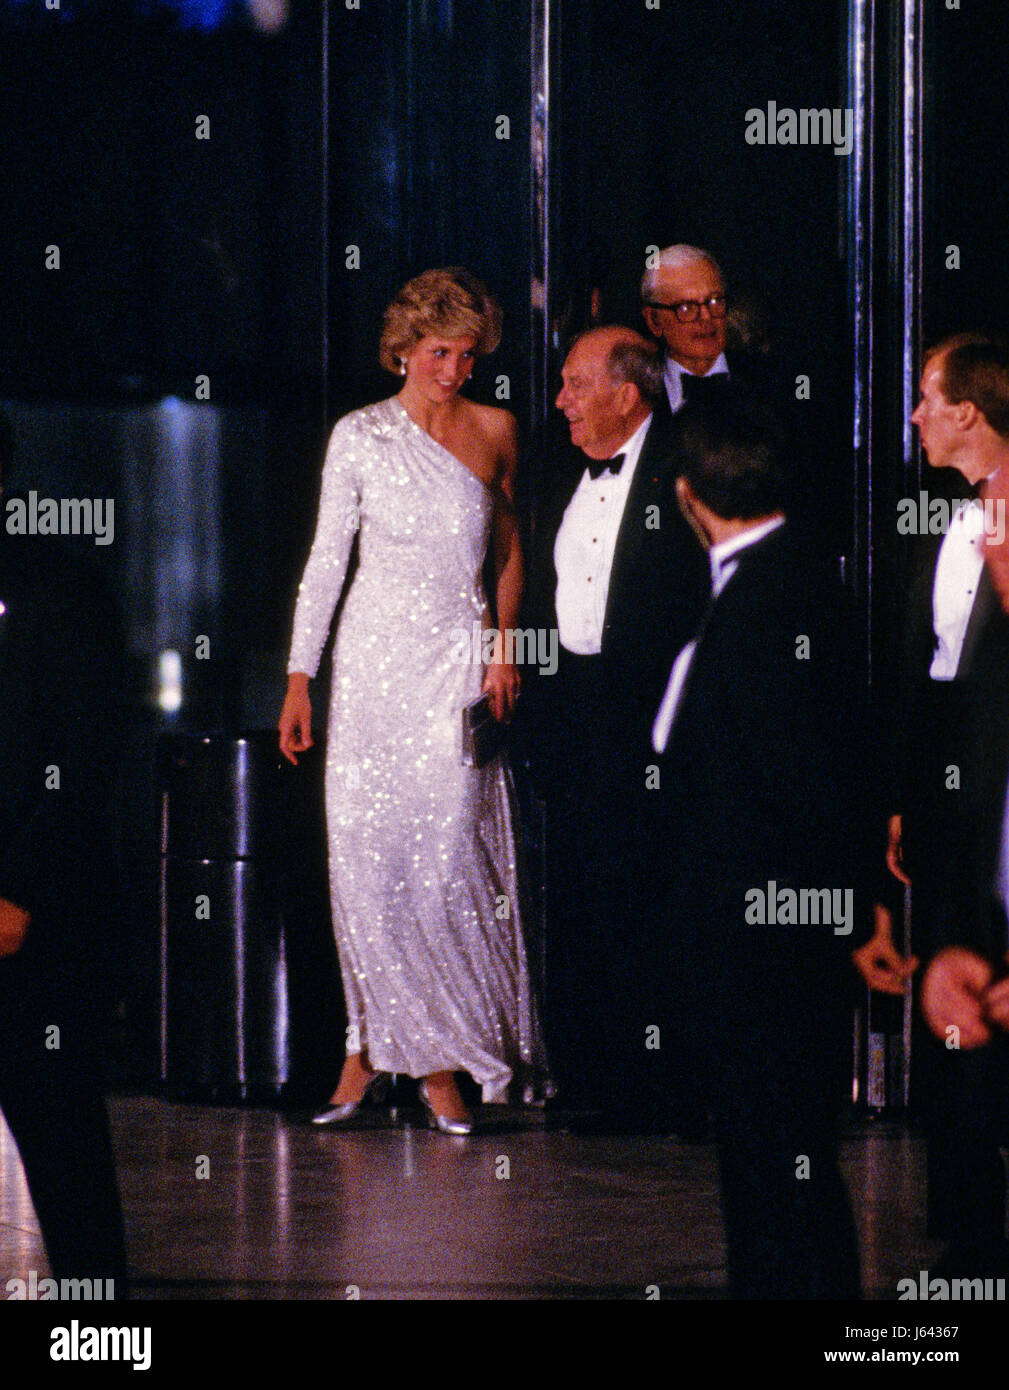 Princess Diana departs the National Gallery of Art in Washington, DC following an evening dinner and reception accompanied by Dr. Franklin Murphy, Board Chairman of the National Gallery of Art, and John Stevenson, President of the National Gallery of Art, in Washington, DC on November 11, 1985. Credit: Howard L. Sachs / CNP - NO WIRE SERVICE- Photo: Howard L. Sachs/Consolidated News Photos/Howard L. Sachs - CNP | usage worldwide Stock Photo